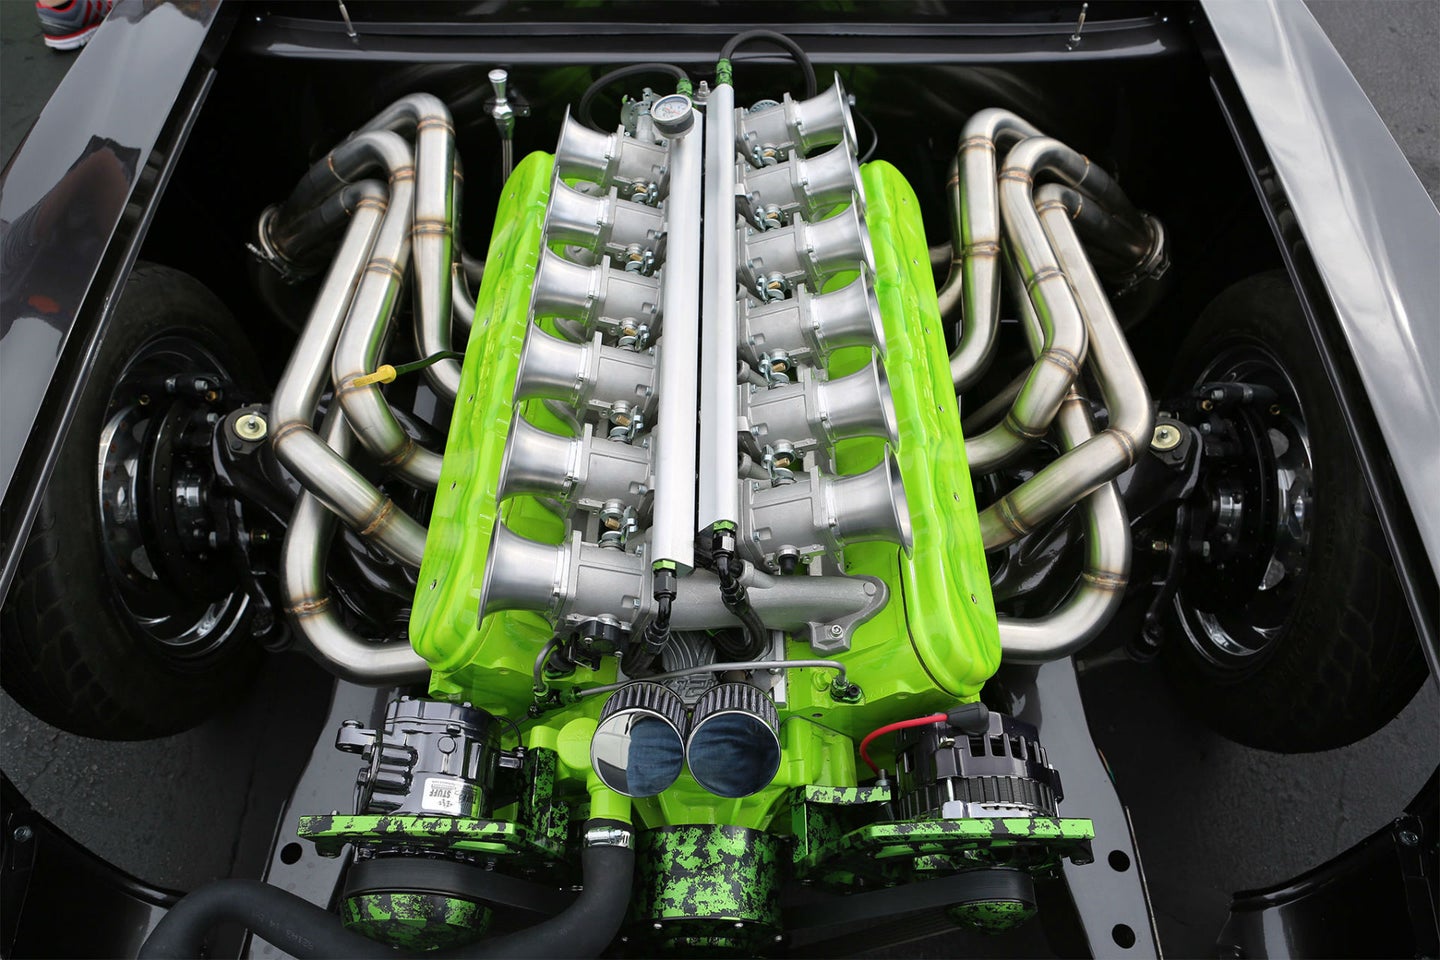 This Company Will Build You Your Own V12 LS Motor